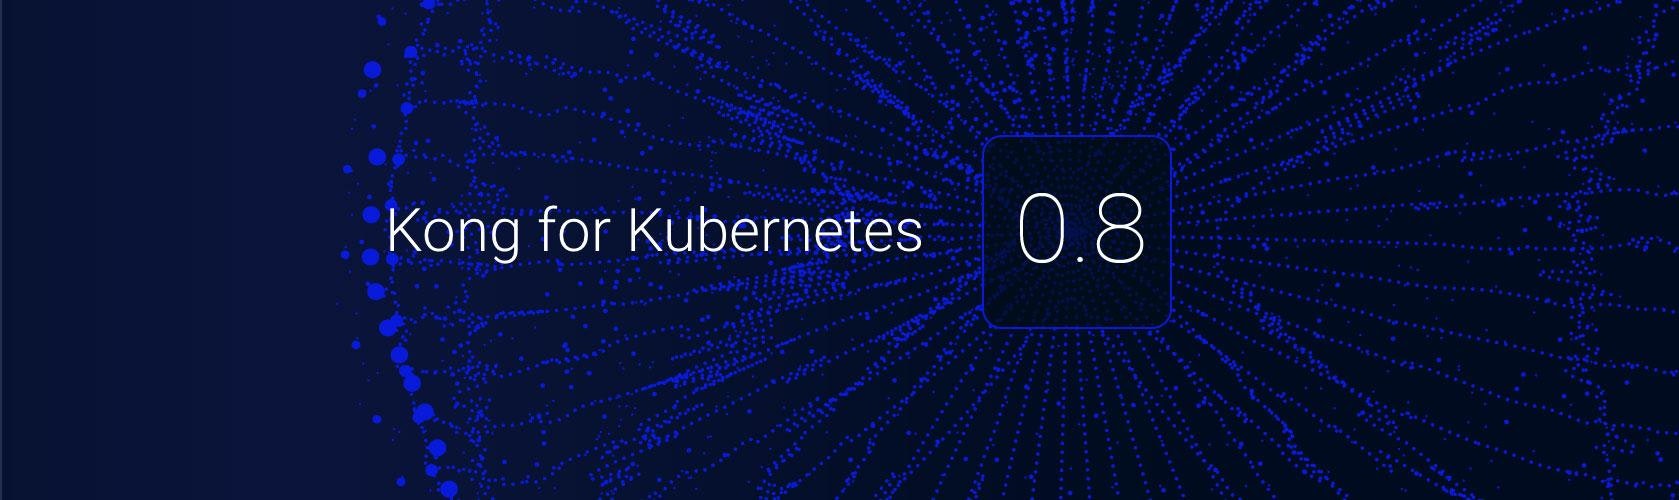 Kong for Kubernetes 0.8 Released!